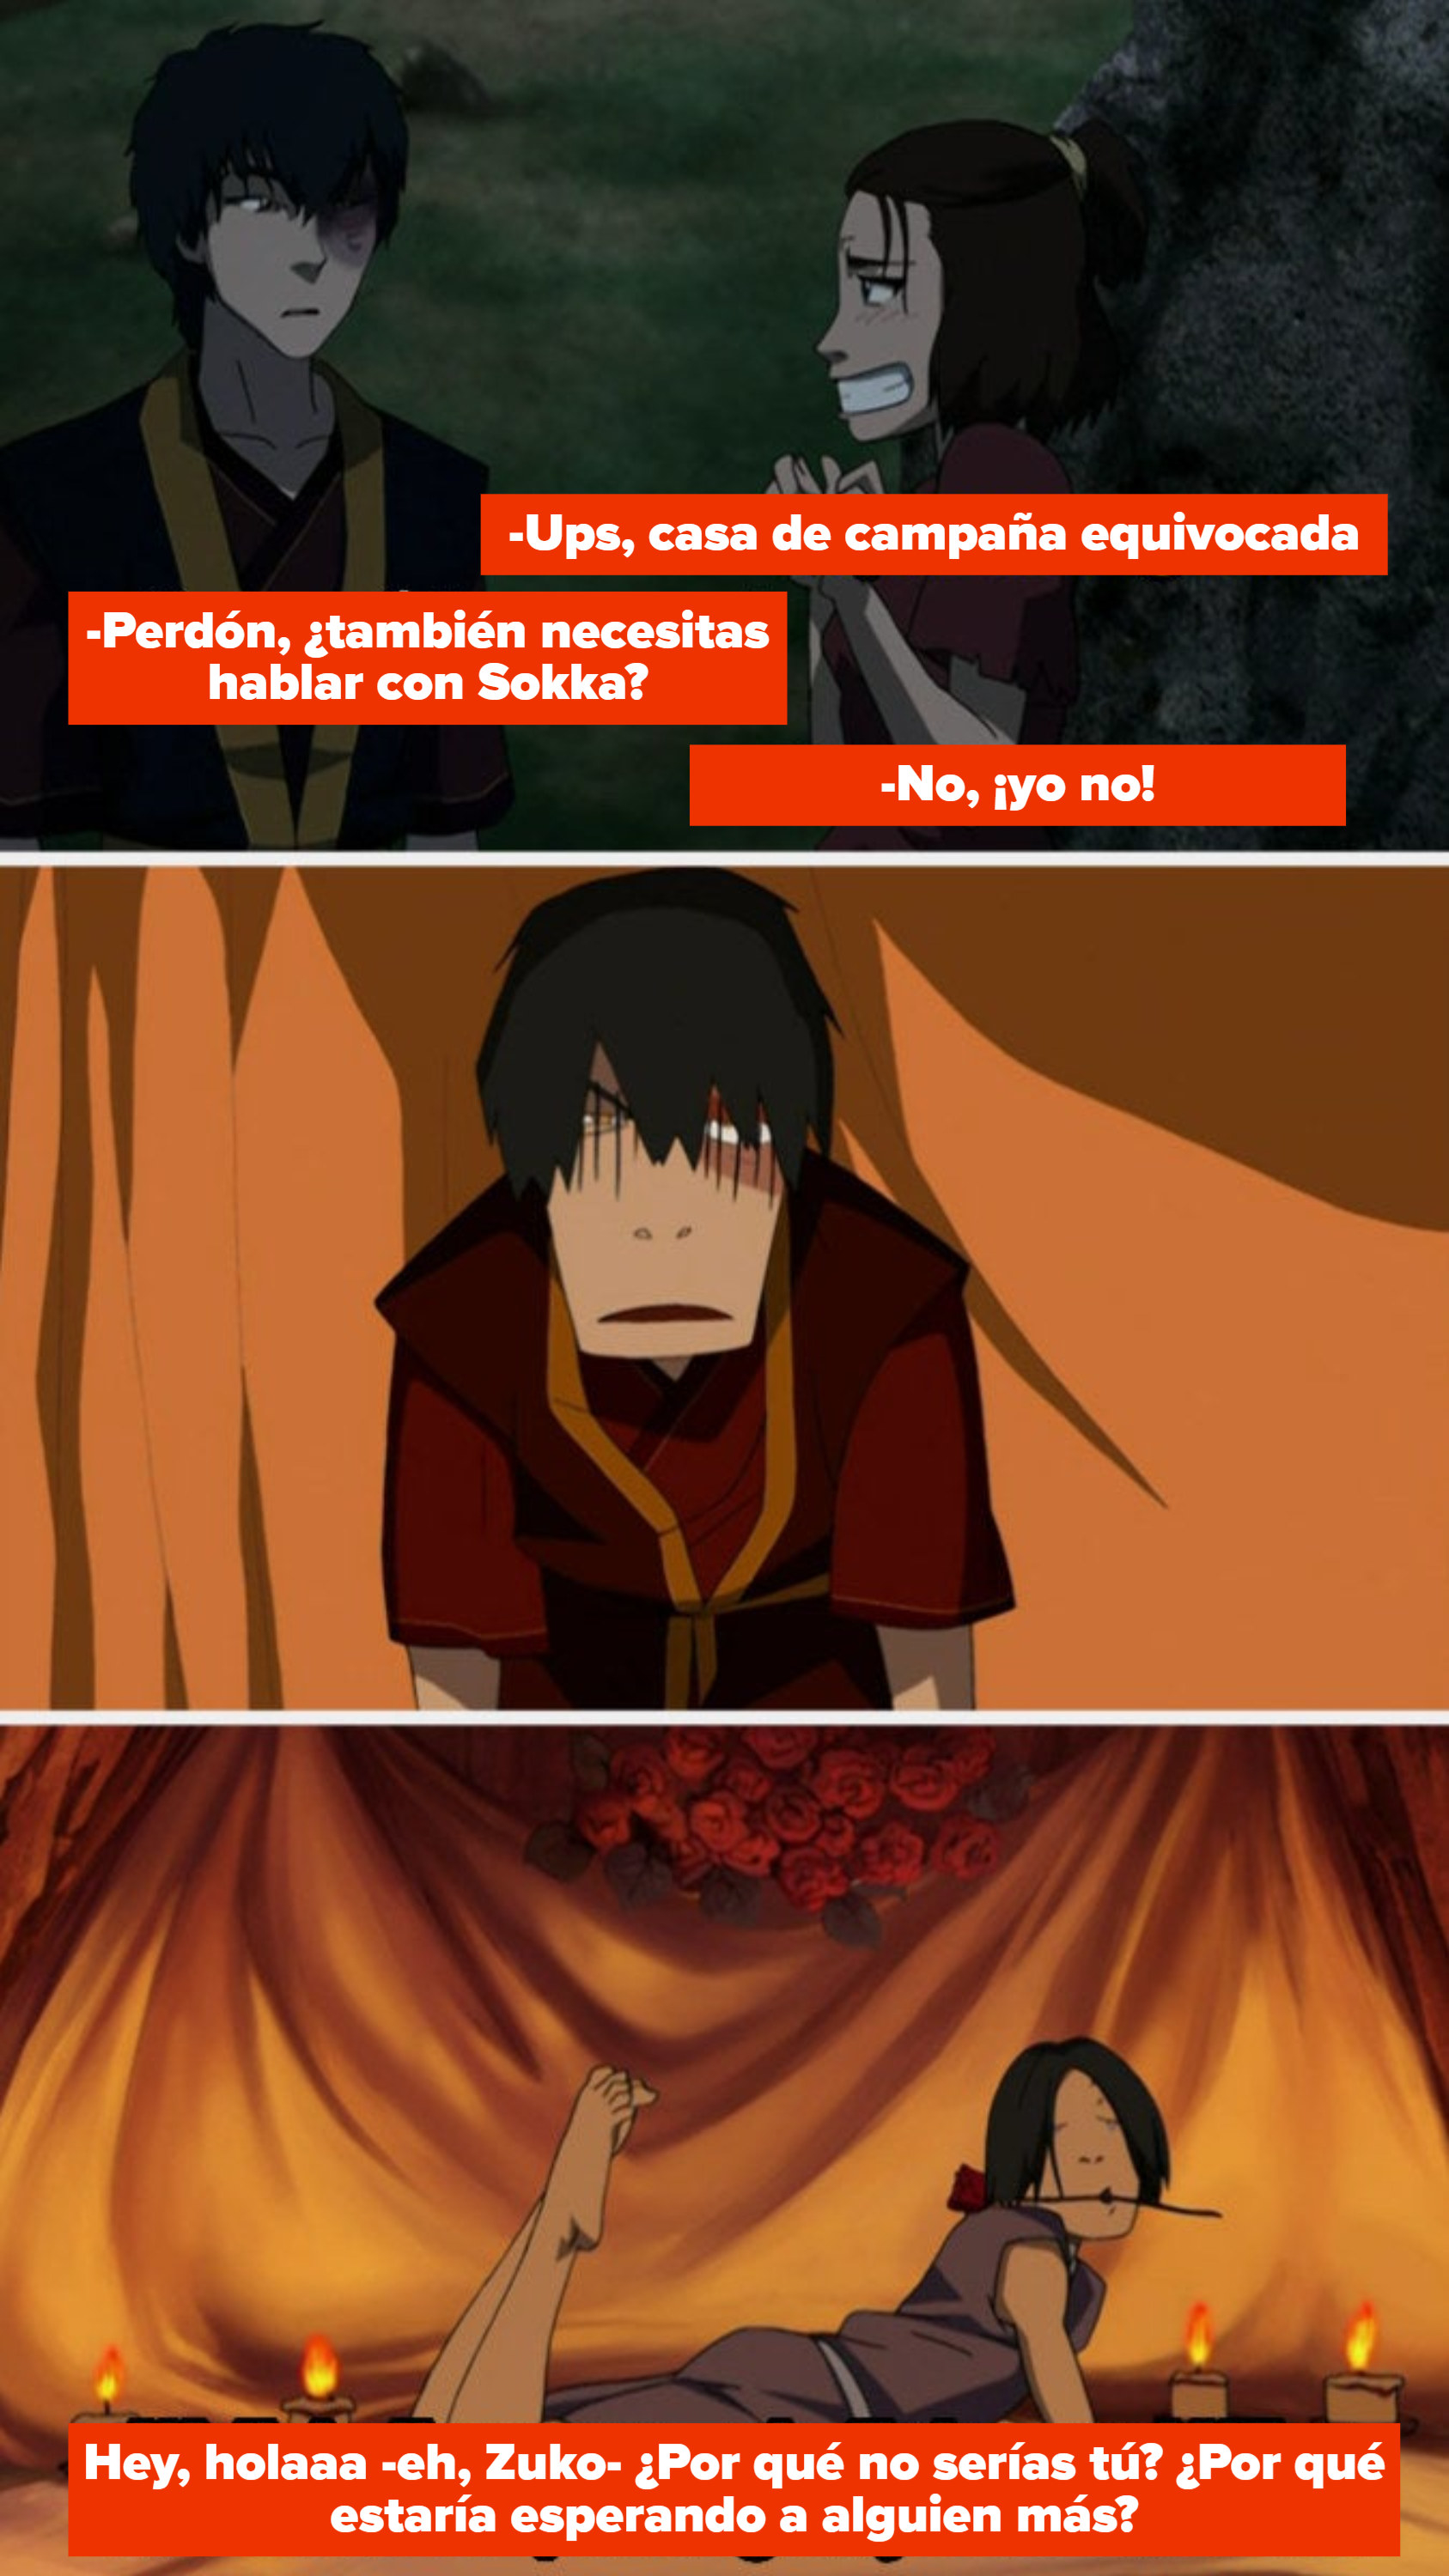 Zuko walks in on Sokka, who is surrounded by roses and lit candles